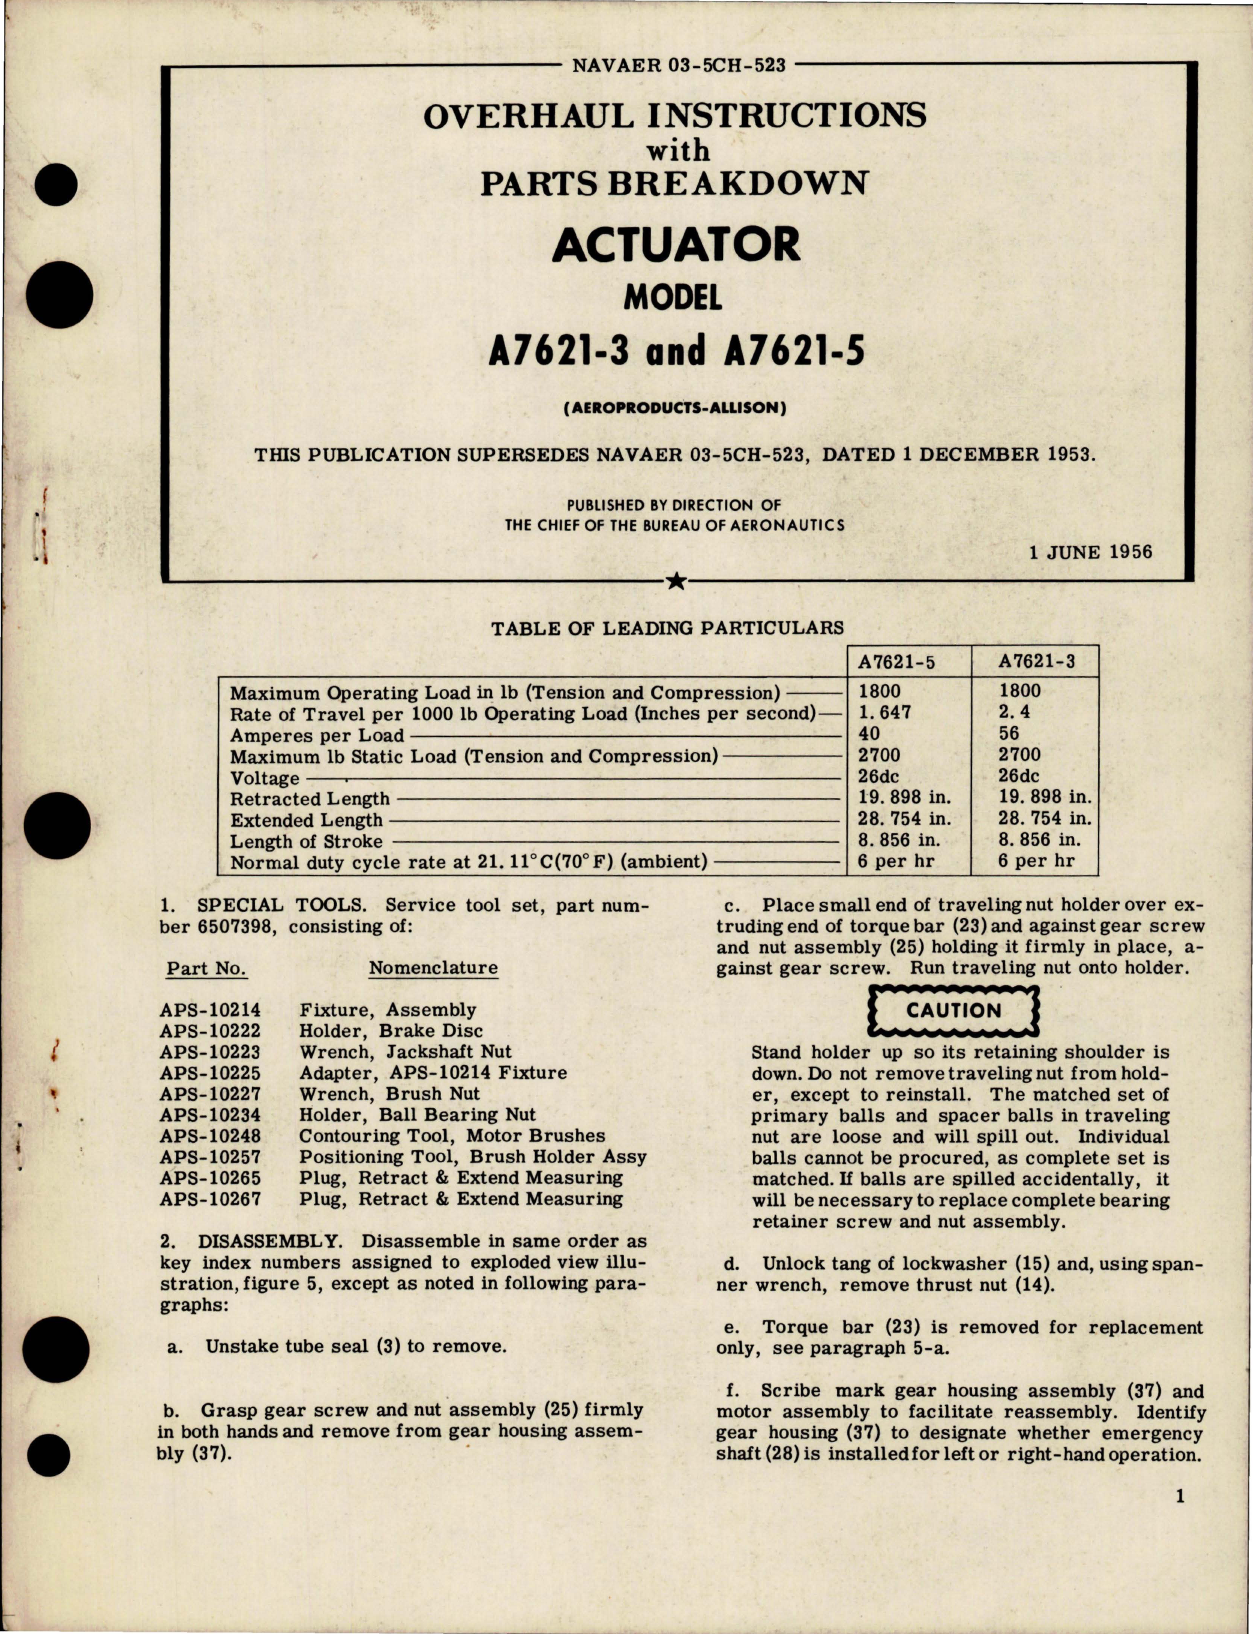 Sample page 1 from AirCorps Library document: Overhaul Instructions with Parts Breakdown for Actuator - Model A7621-3 and A7621-5 